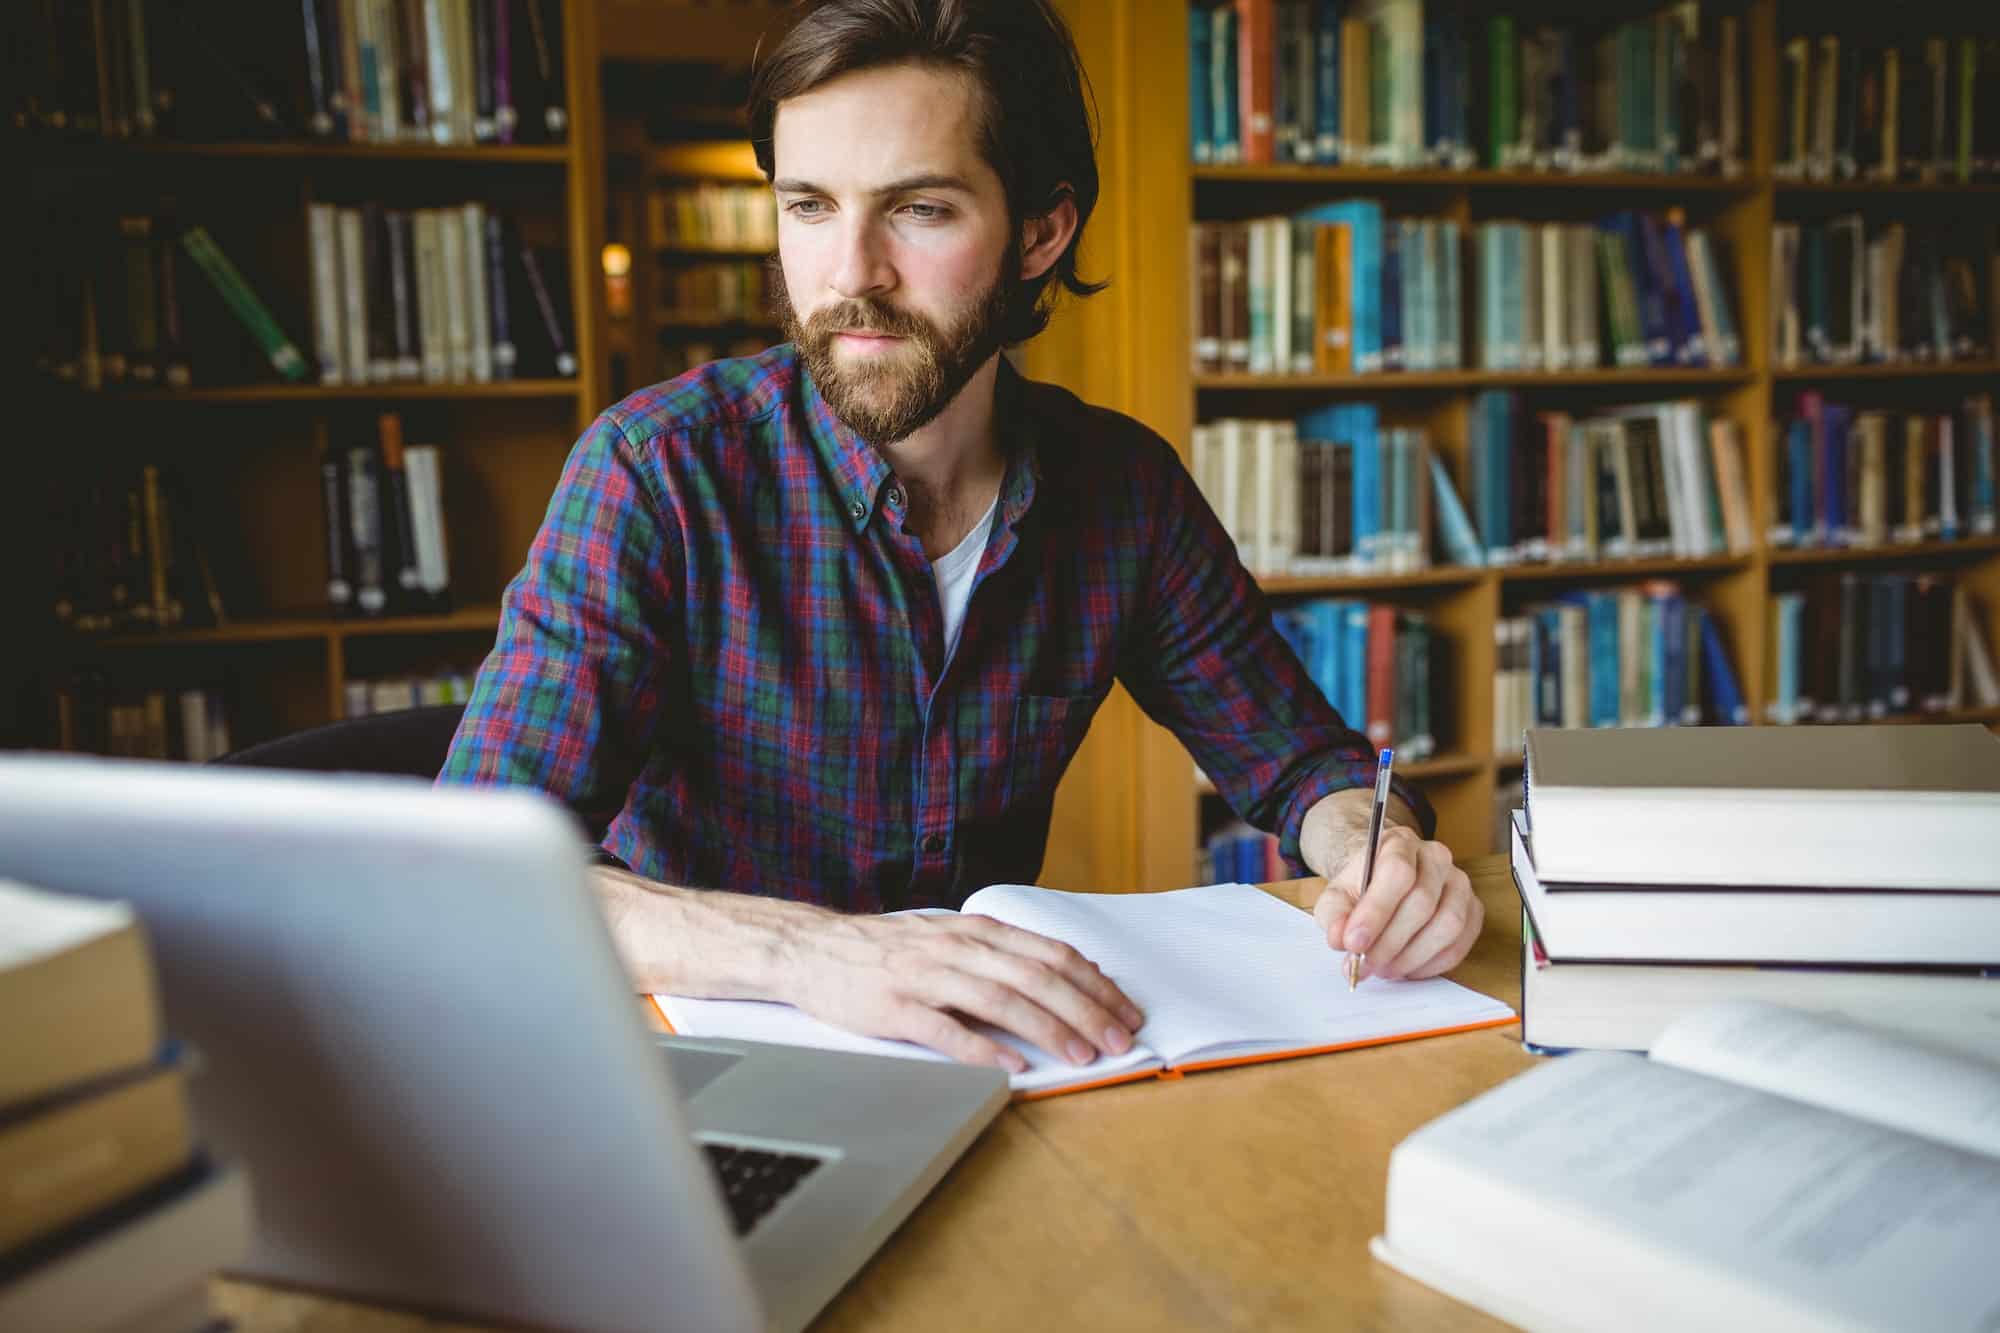 Hipster student studying in library at the university